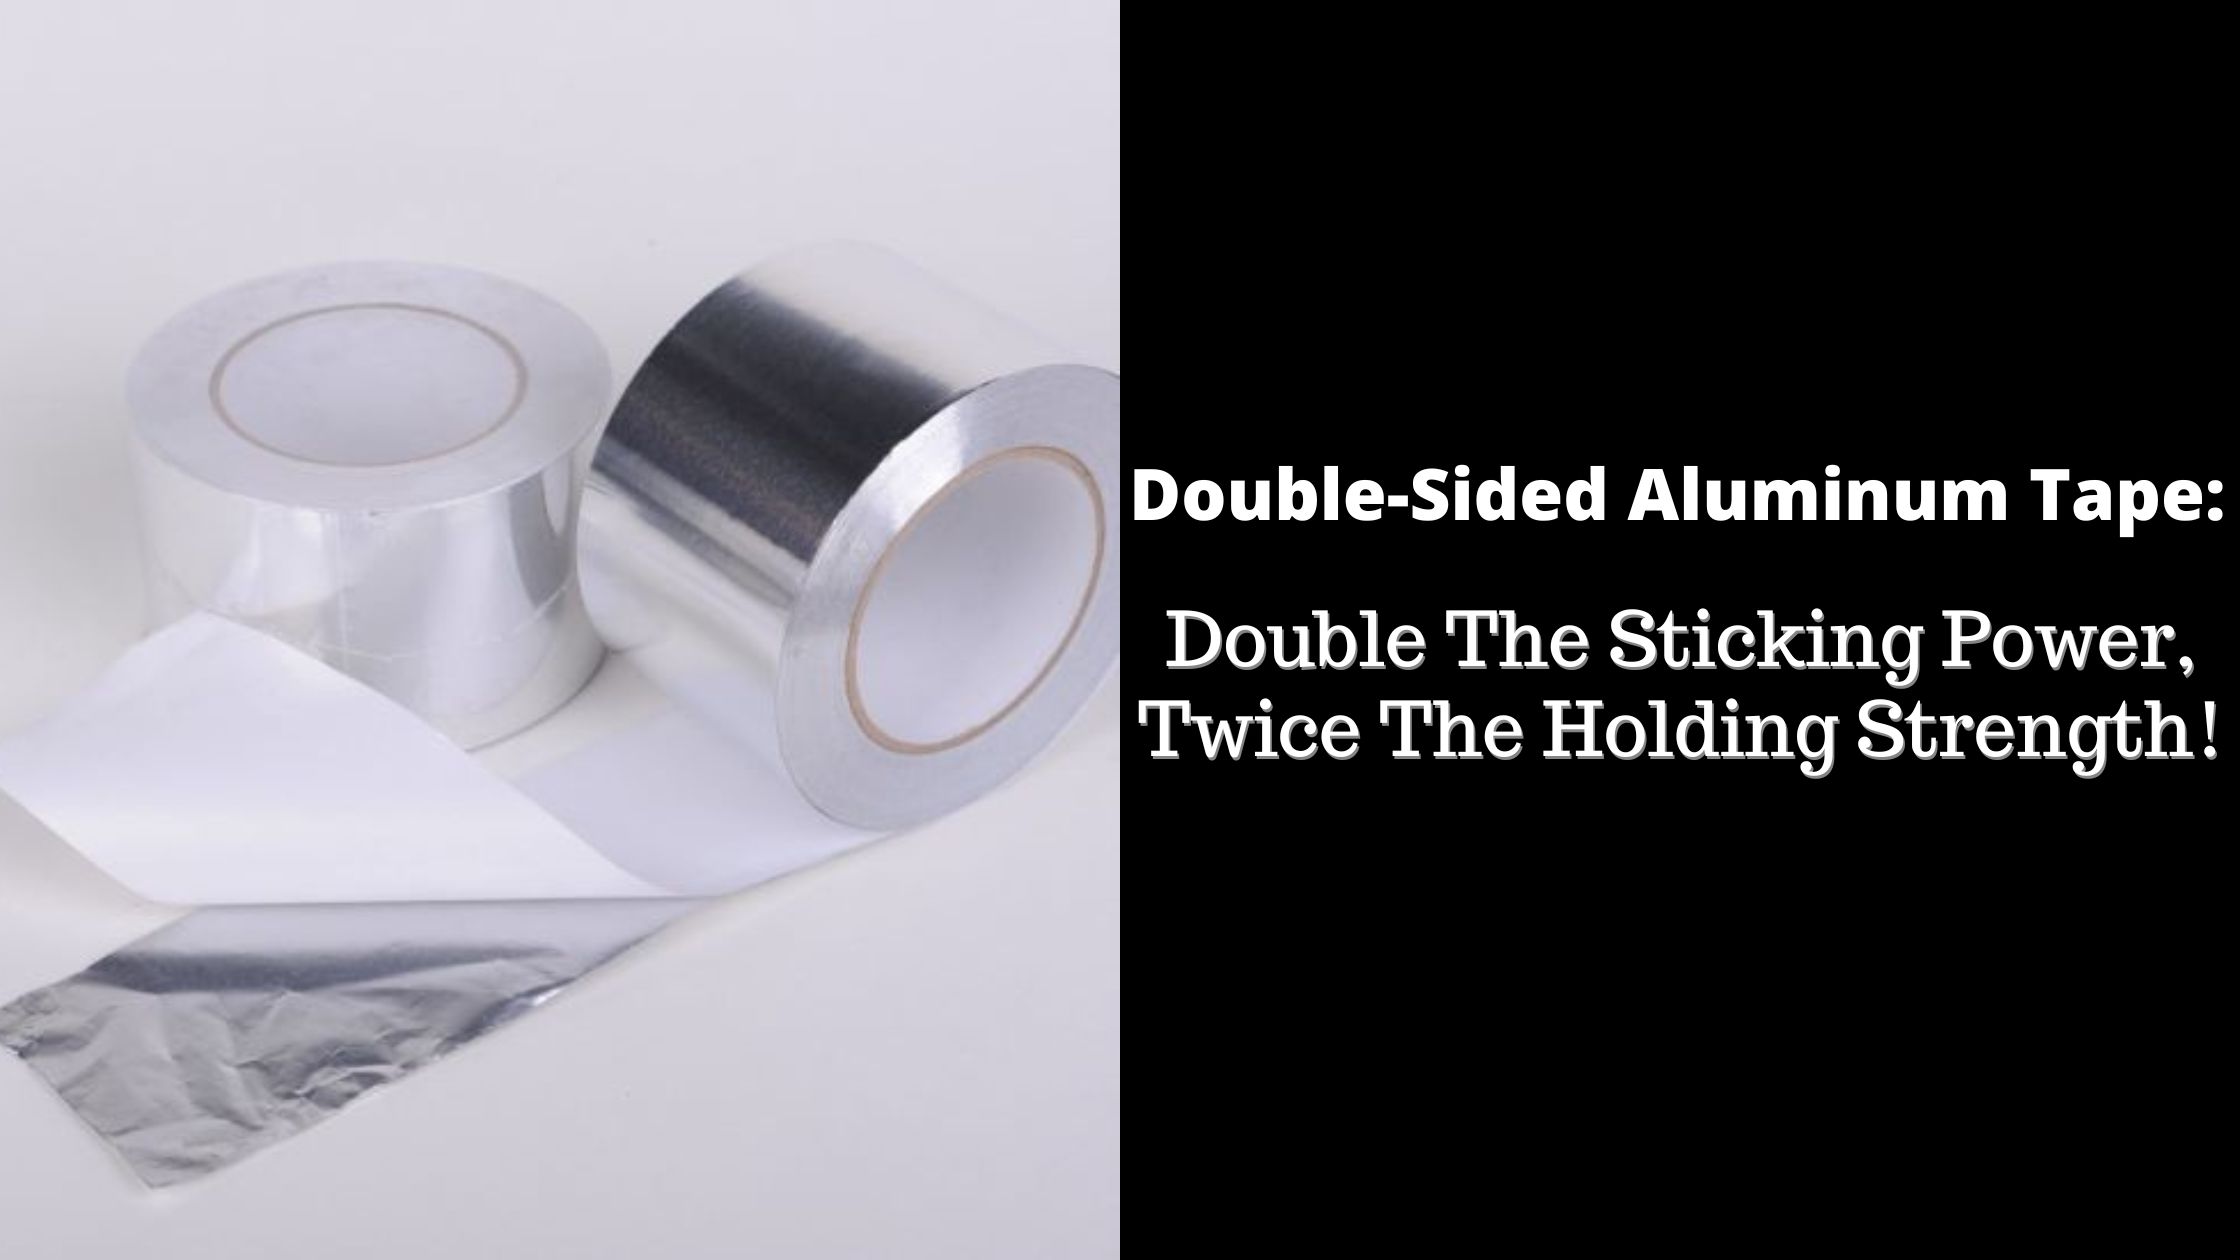 Is All Aluminum Tape Double-Sided